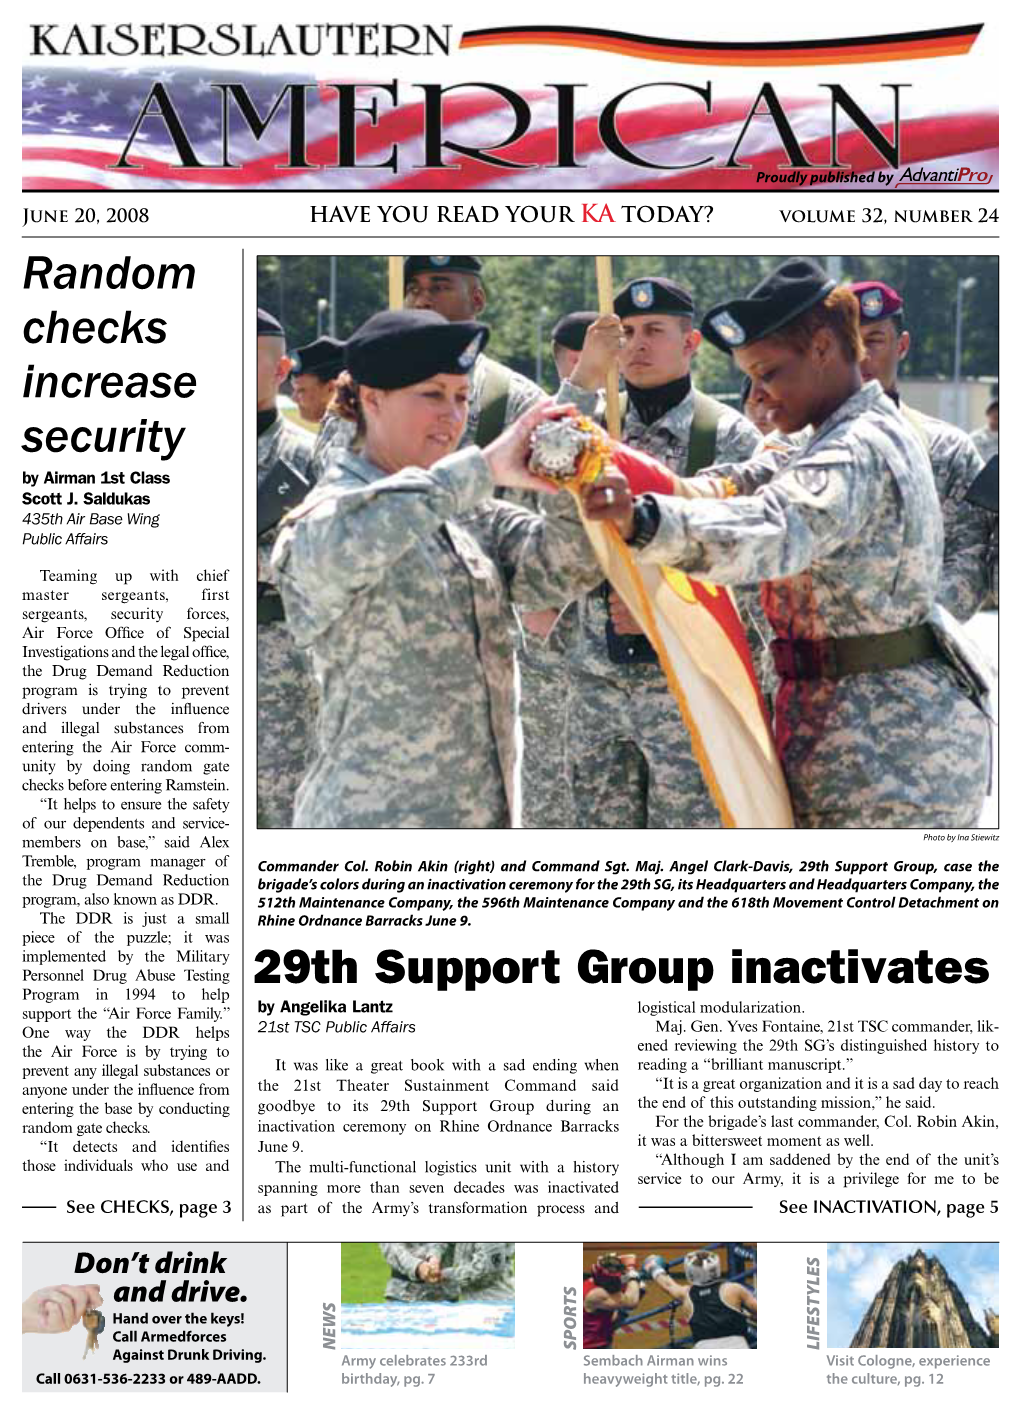 Random Checks Increase Security 29Th Support Group Inactivates